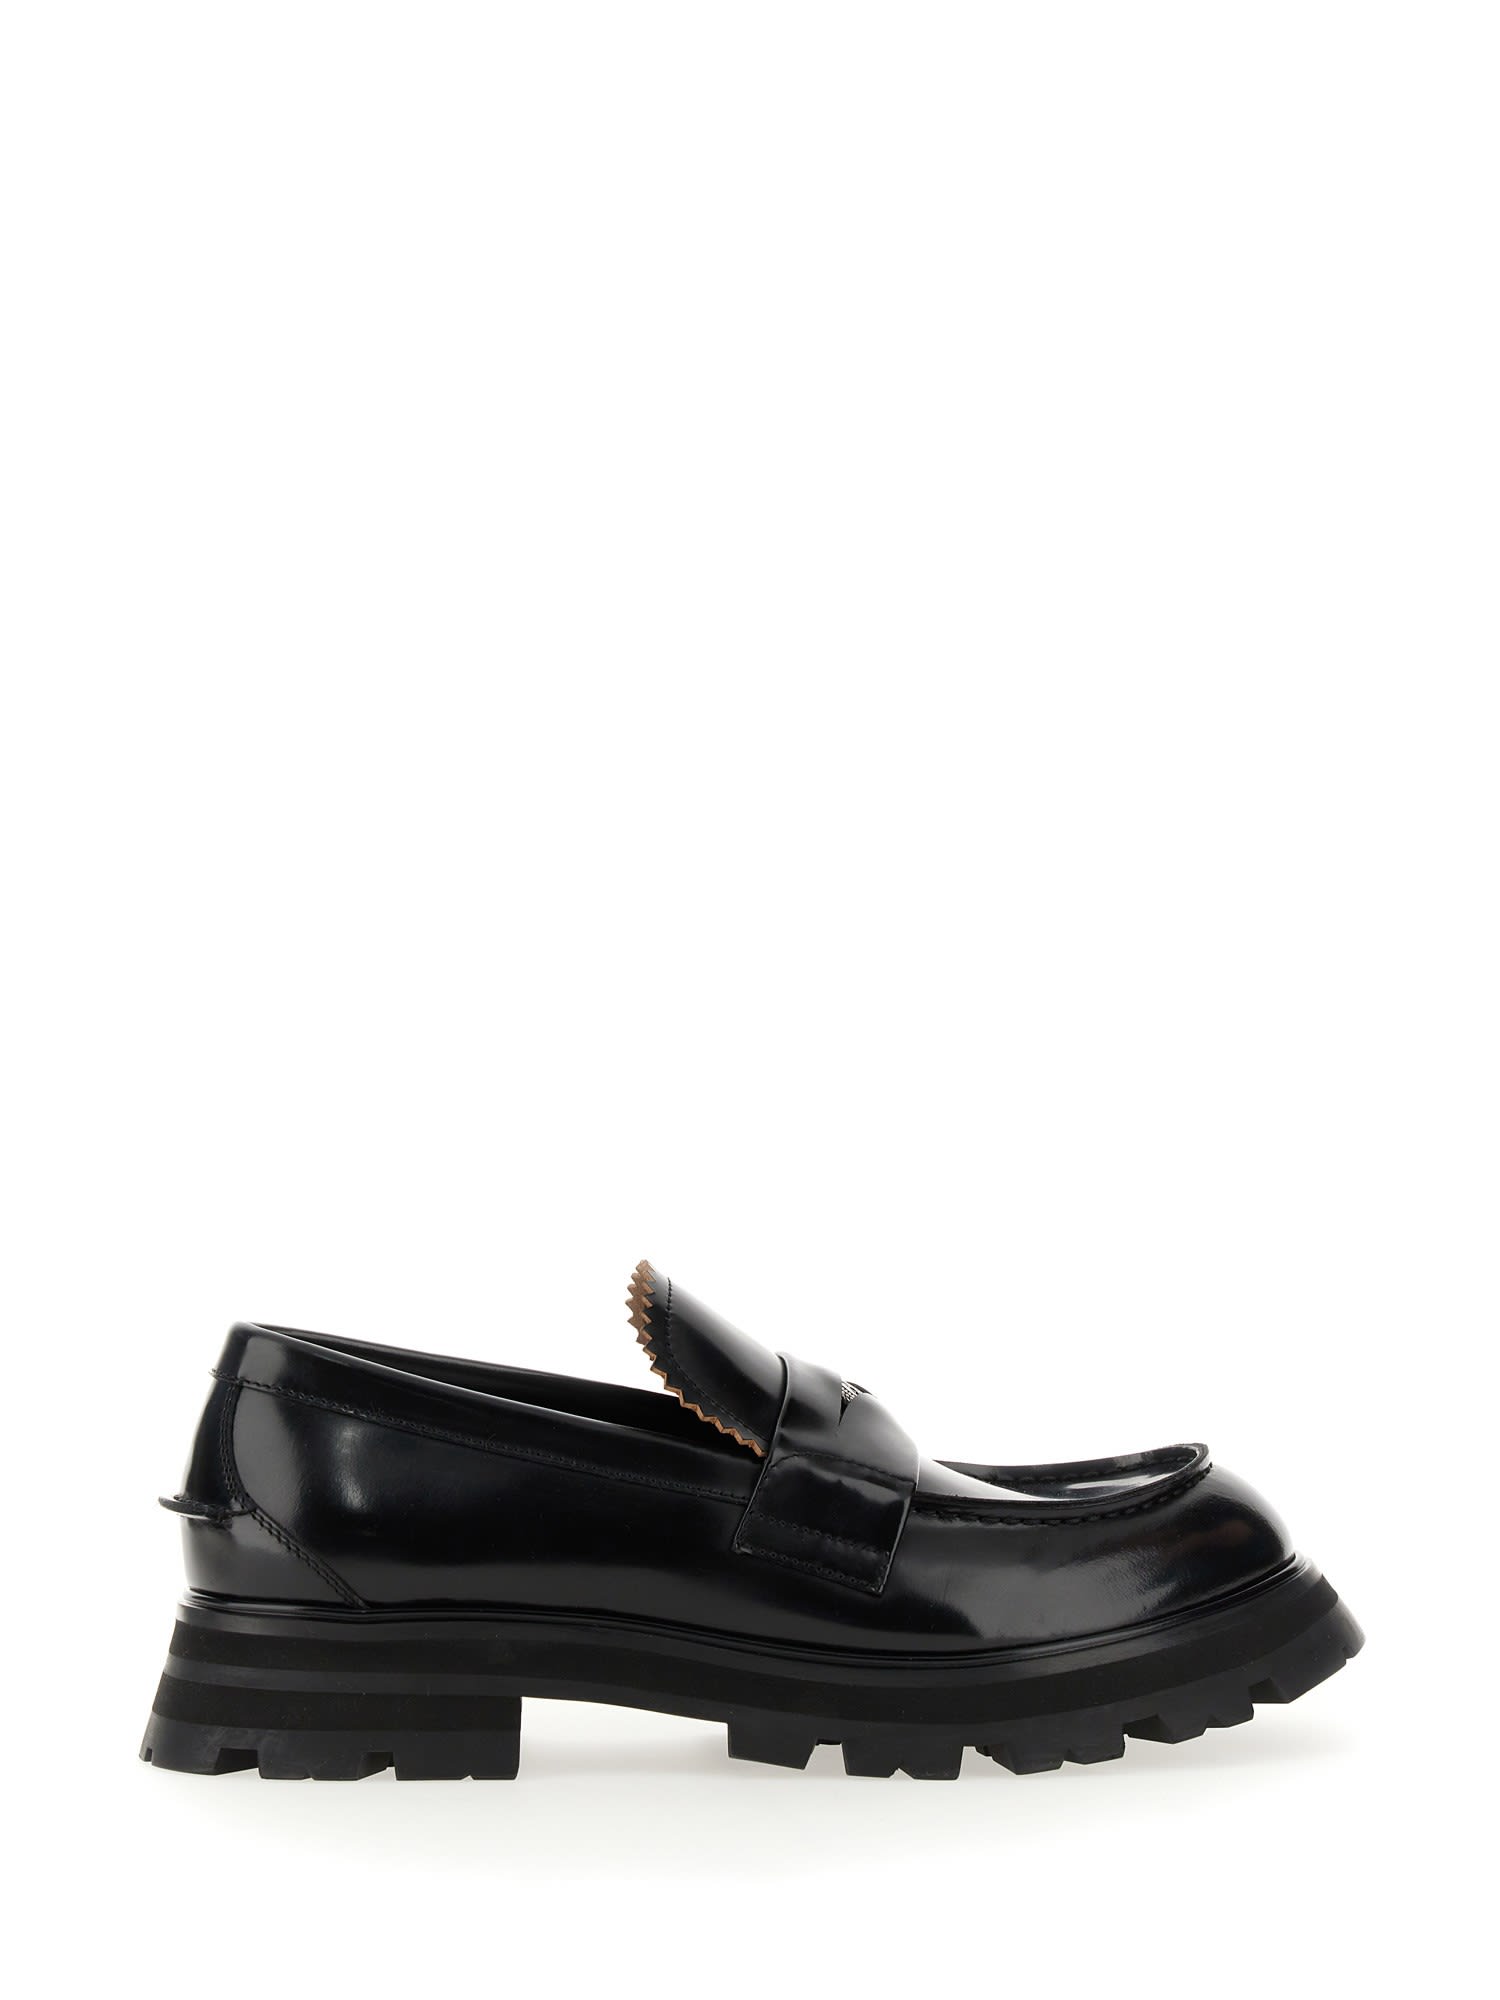 ALEXANDER MCQUEEN LEATHER LOAFER